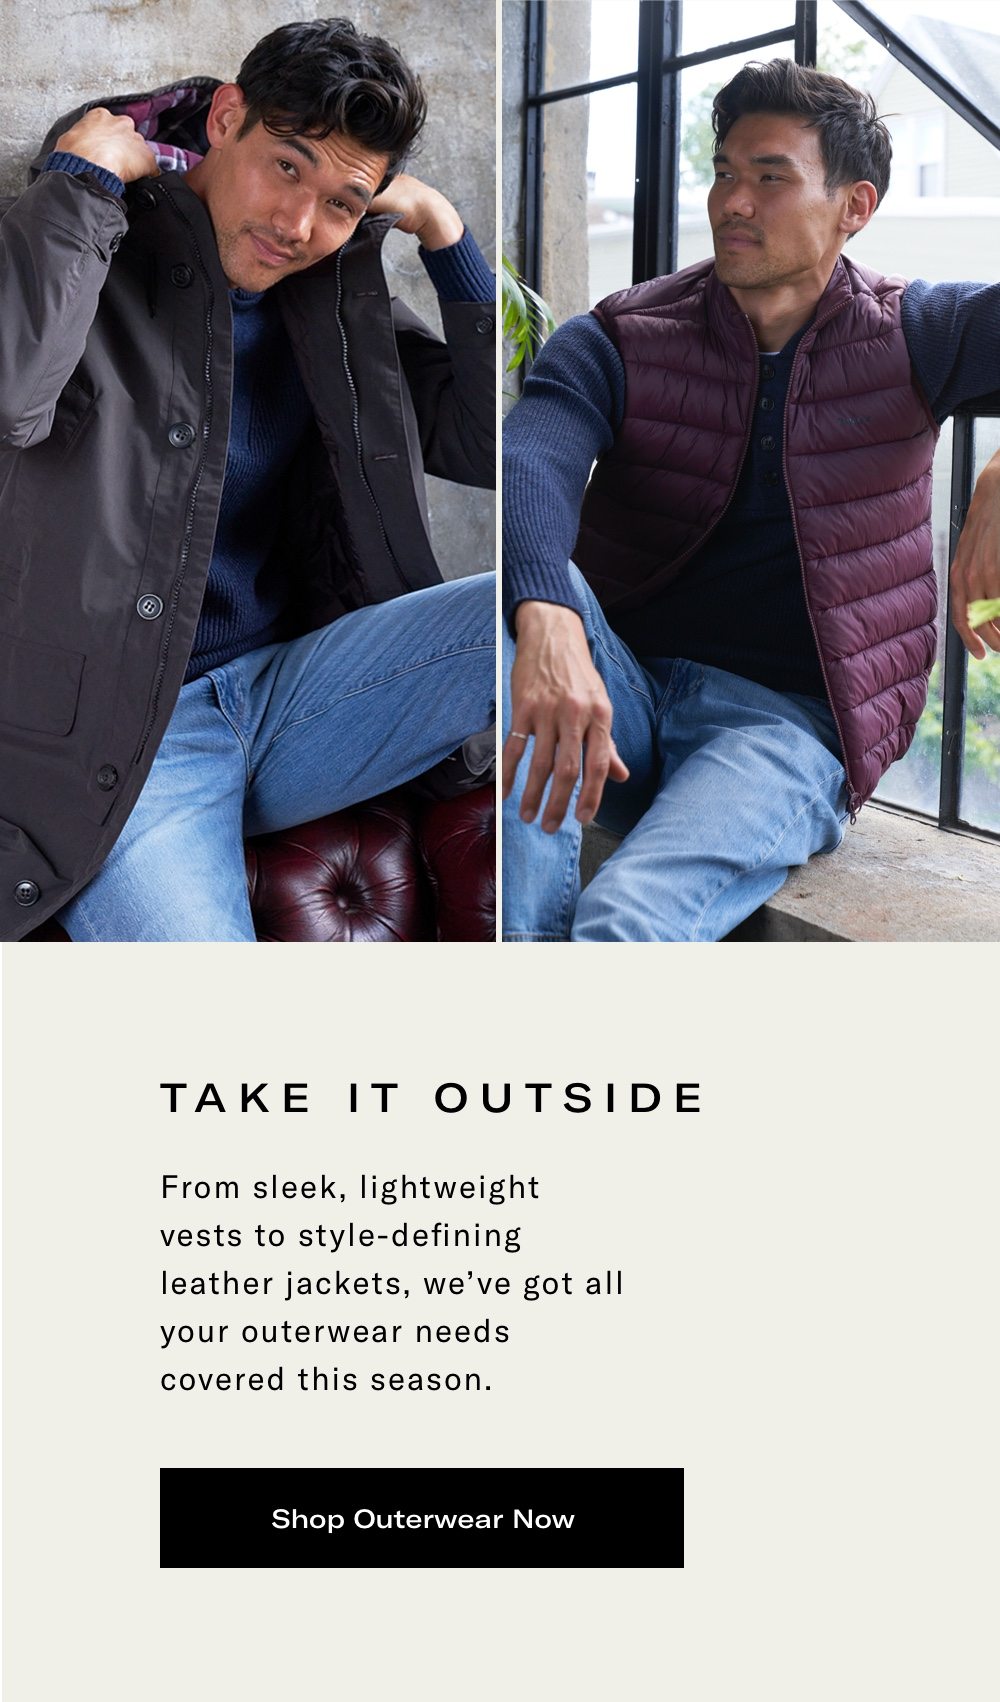 Save on Outerwear Now